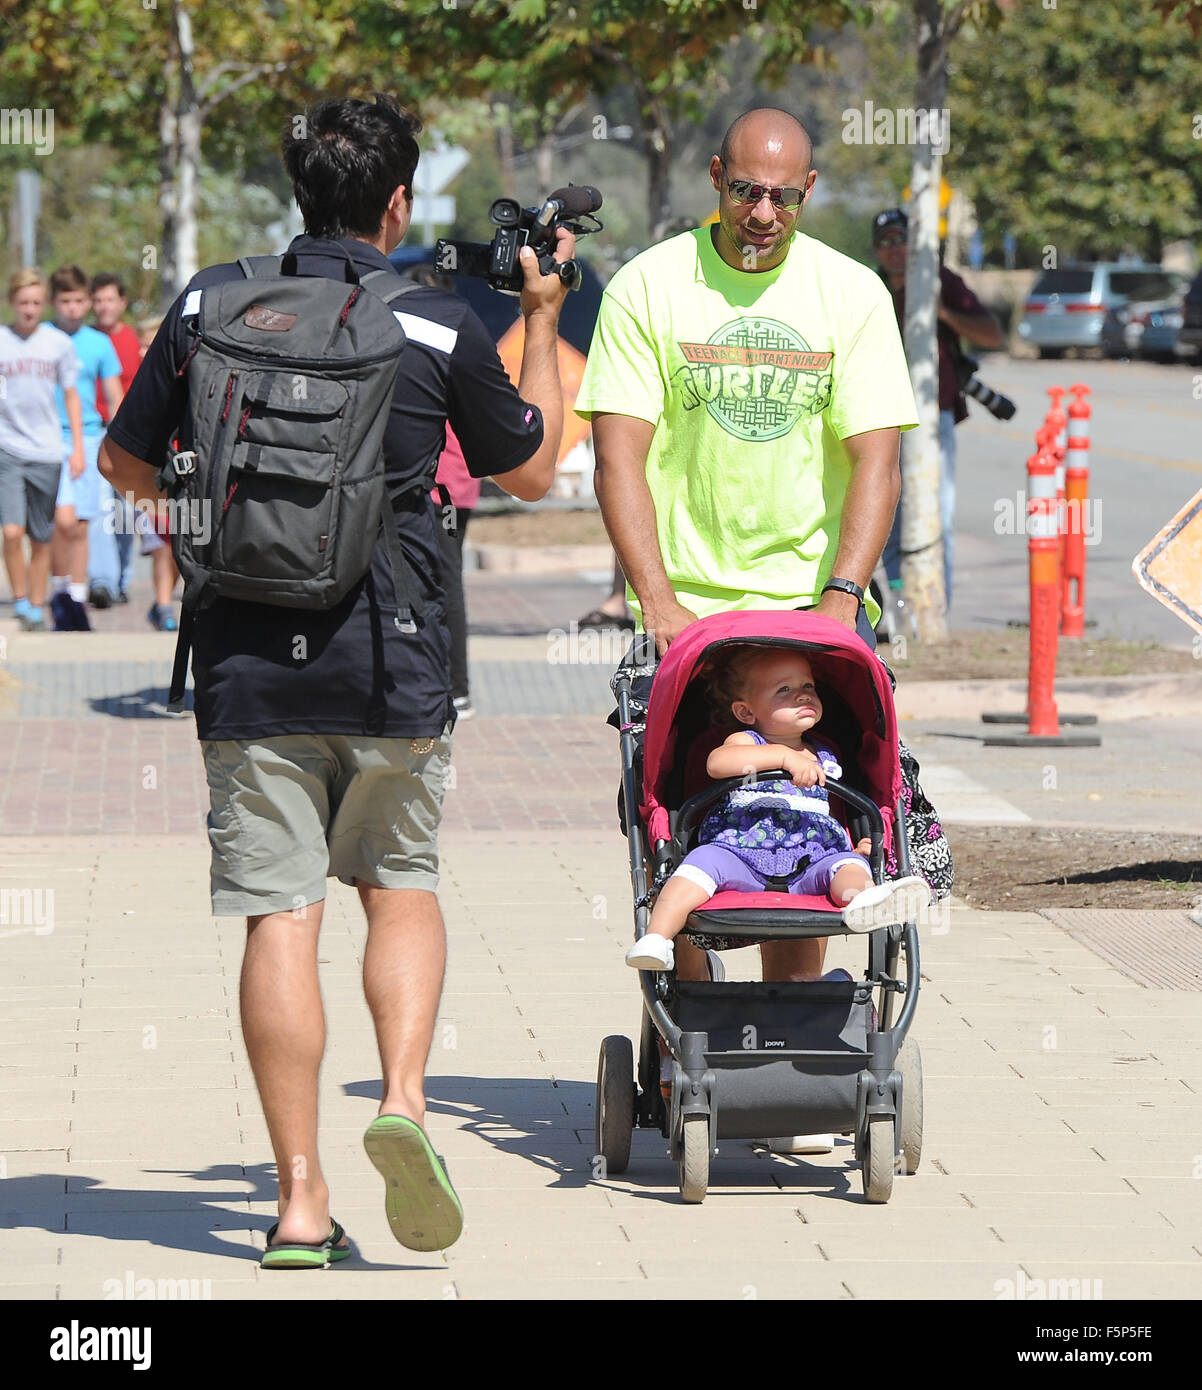 Hank Baskett does an impromptu interview while strolling with daughter Alijah Mary Baskett  Featuring: Hank Baskett Alijah Mary Baskett Where: Los Angeles, California, United States When: 06 Sep 2015 Stock Photo